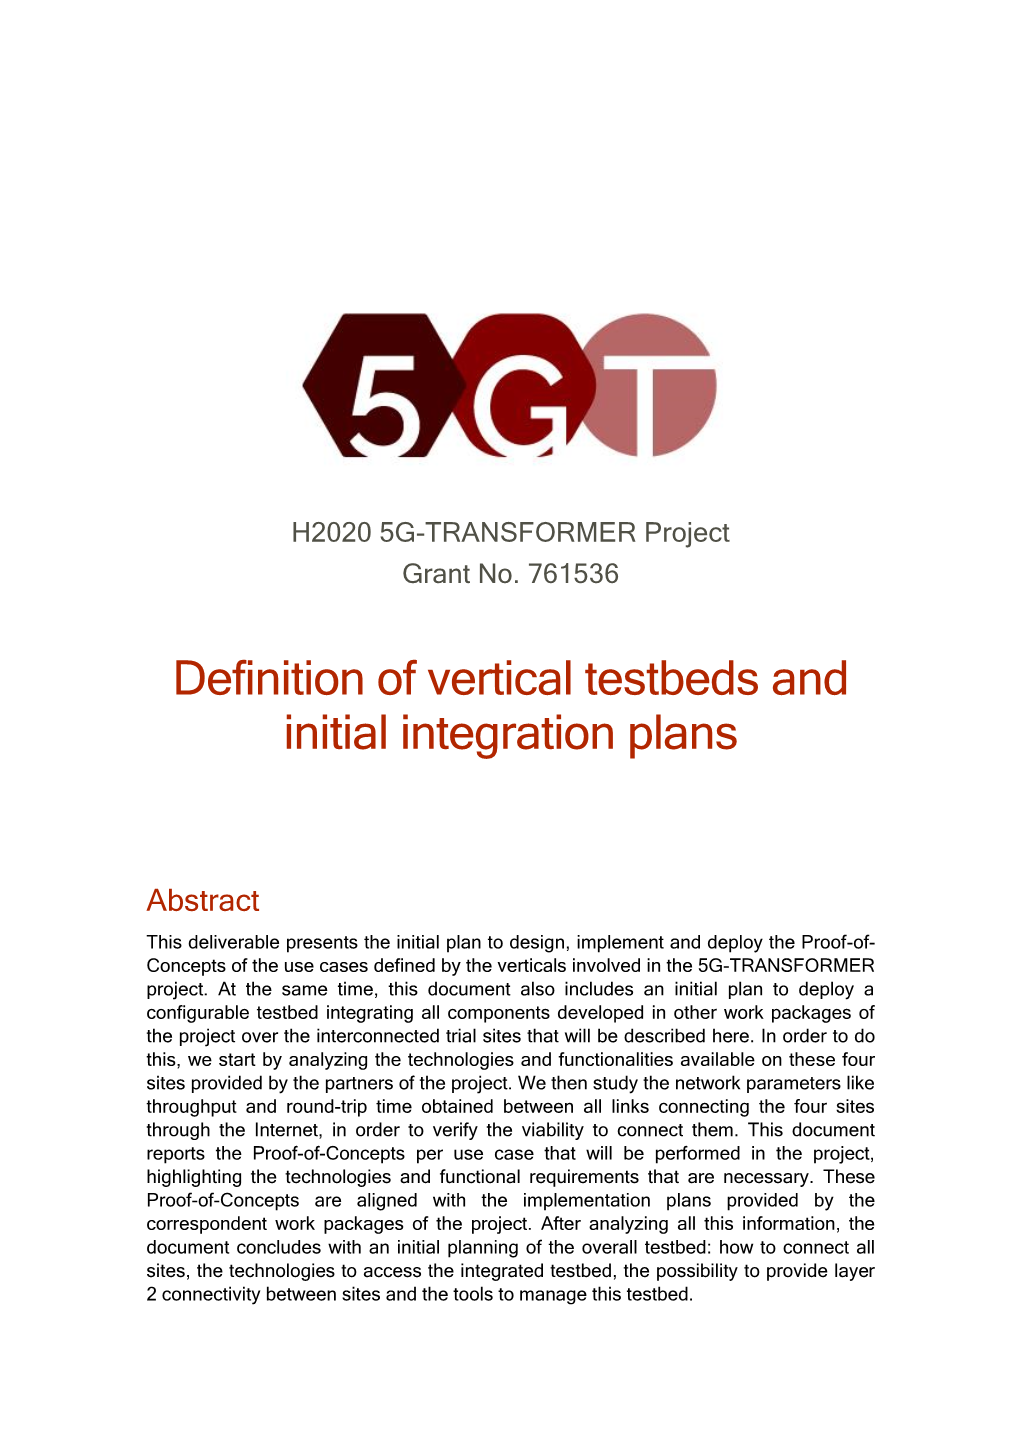 Definition of Vertical Testbeds and Initial Integration Plans